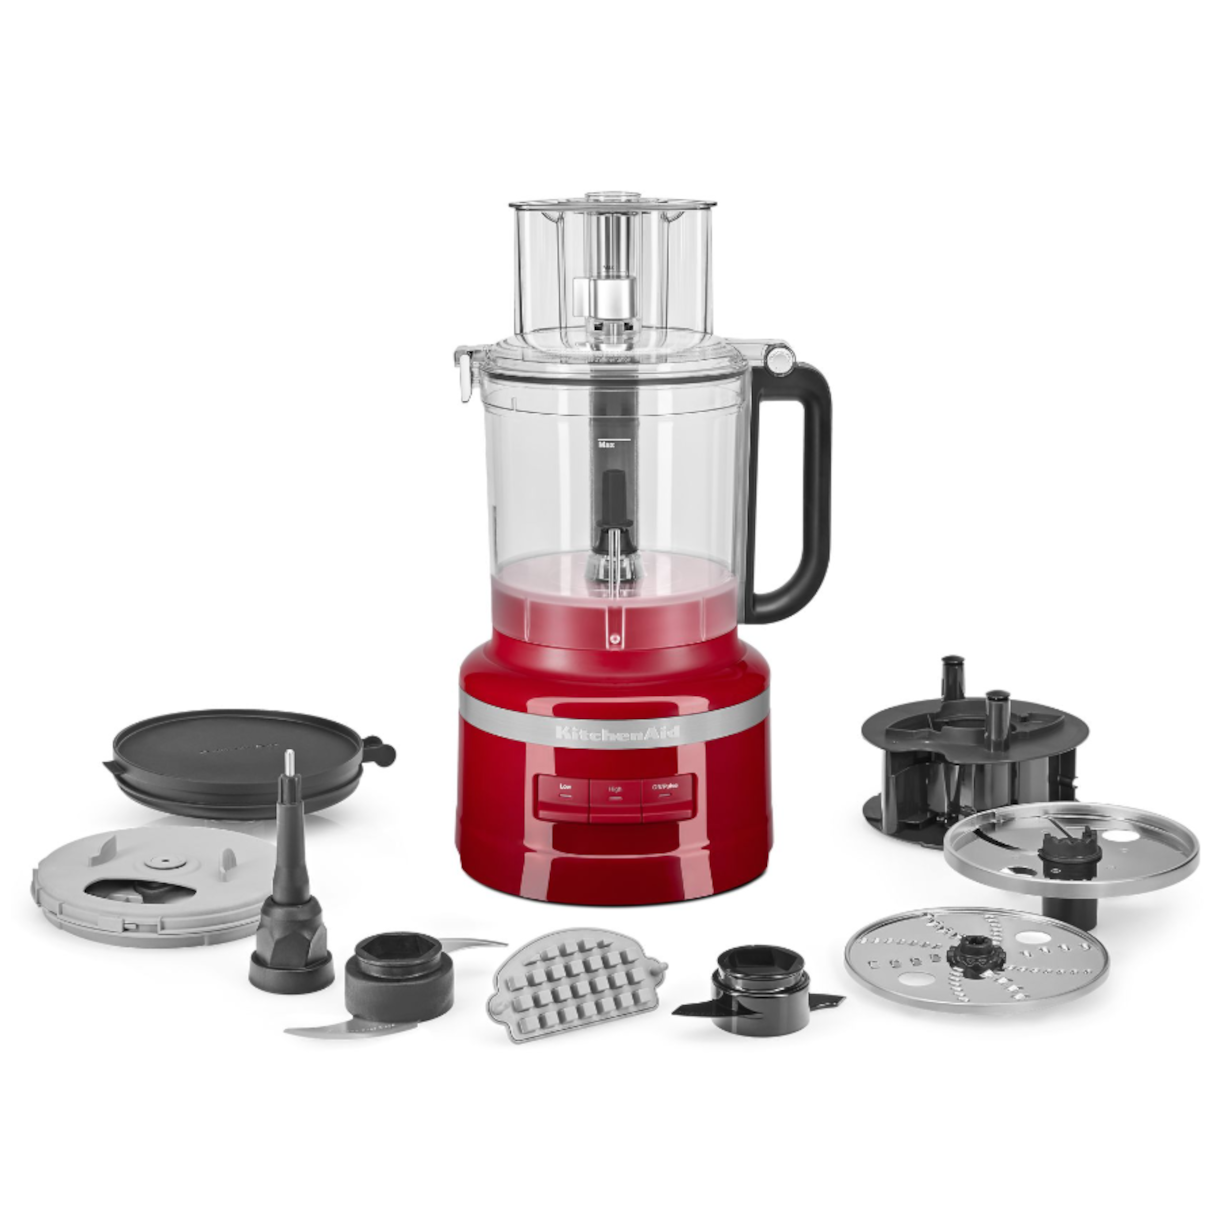 KitchenAid?? 13-Cup Food Processor with Dicing Kit